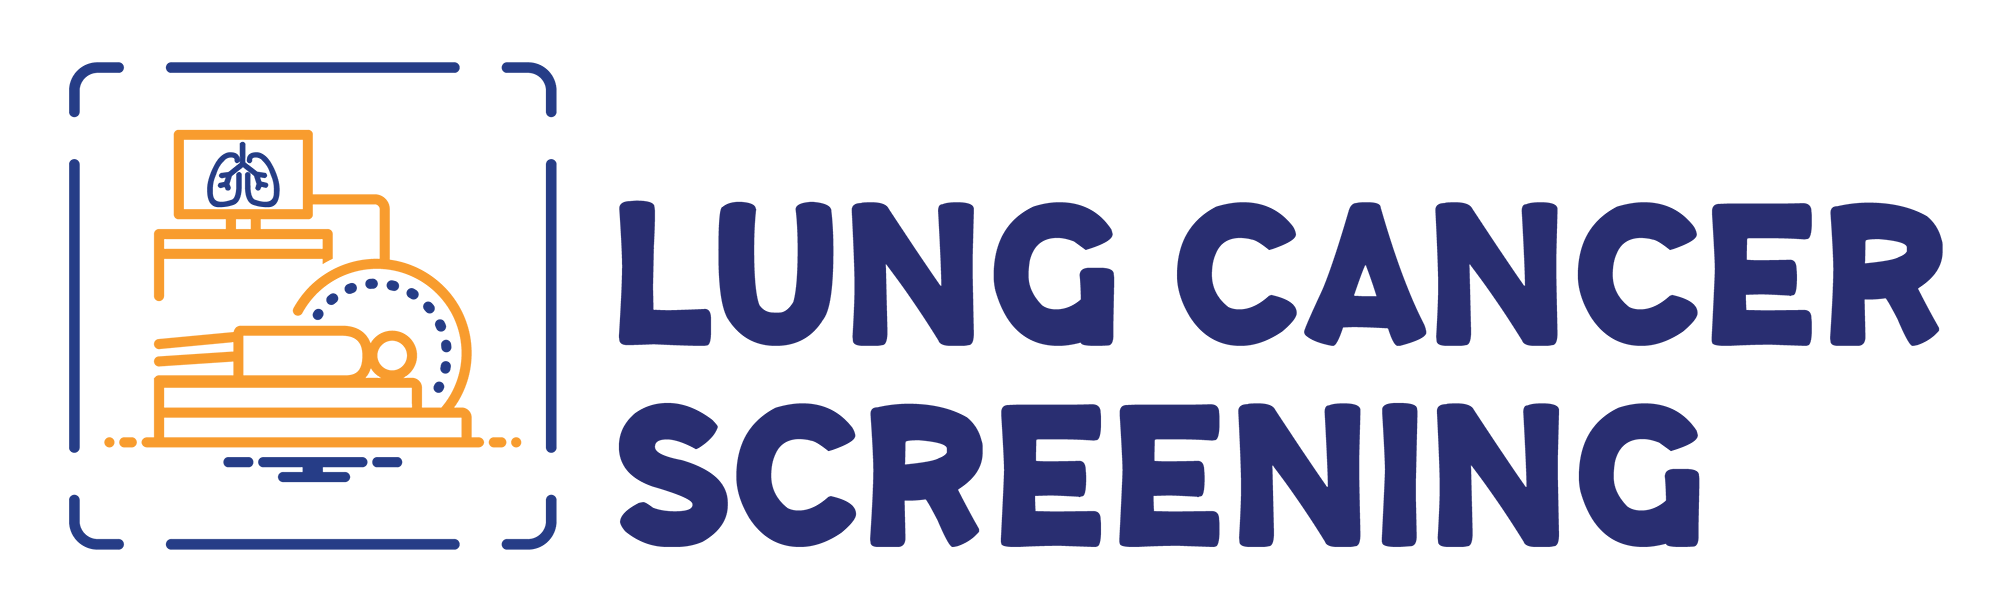 Lung Cancer Screening, Delaware Imaging Network